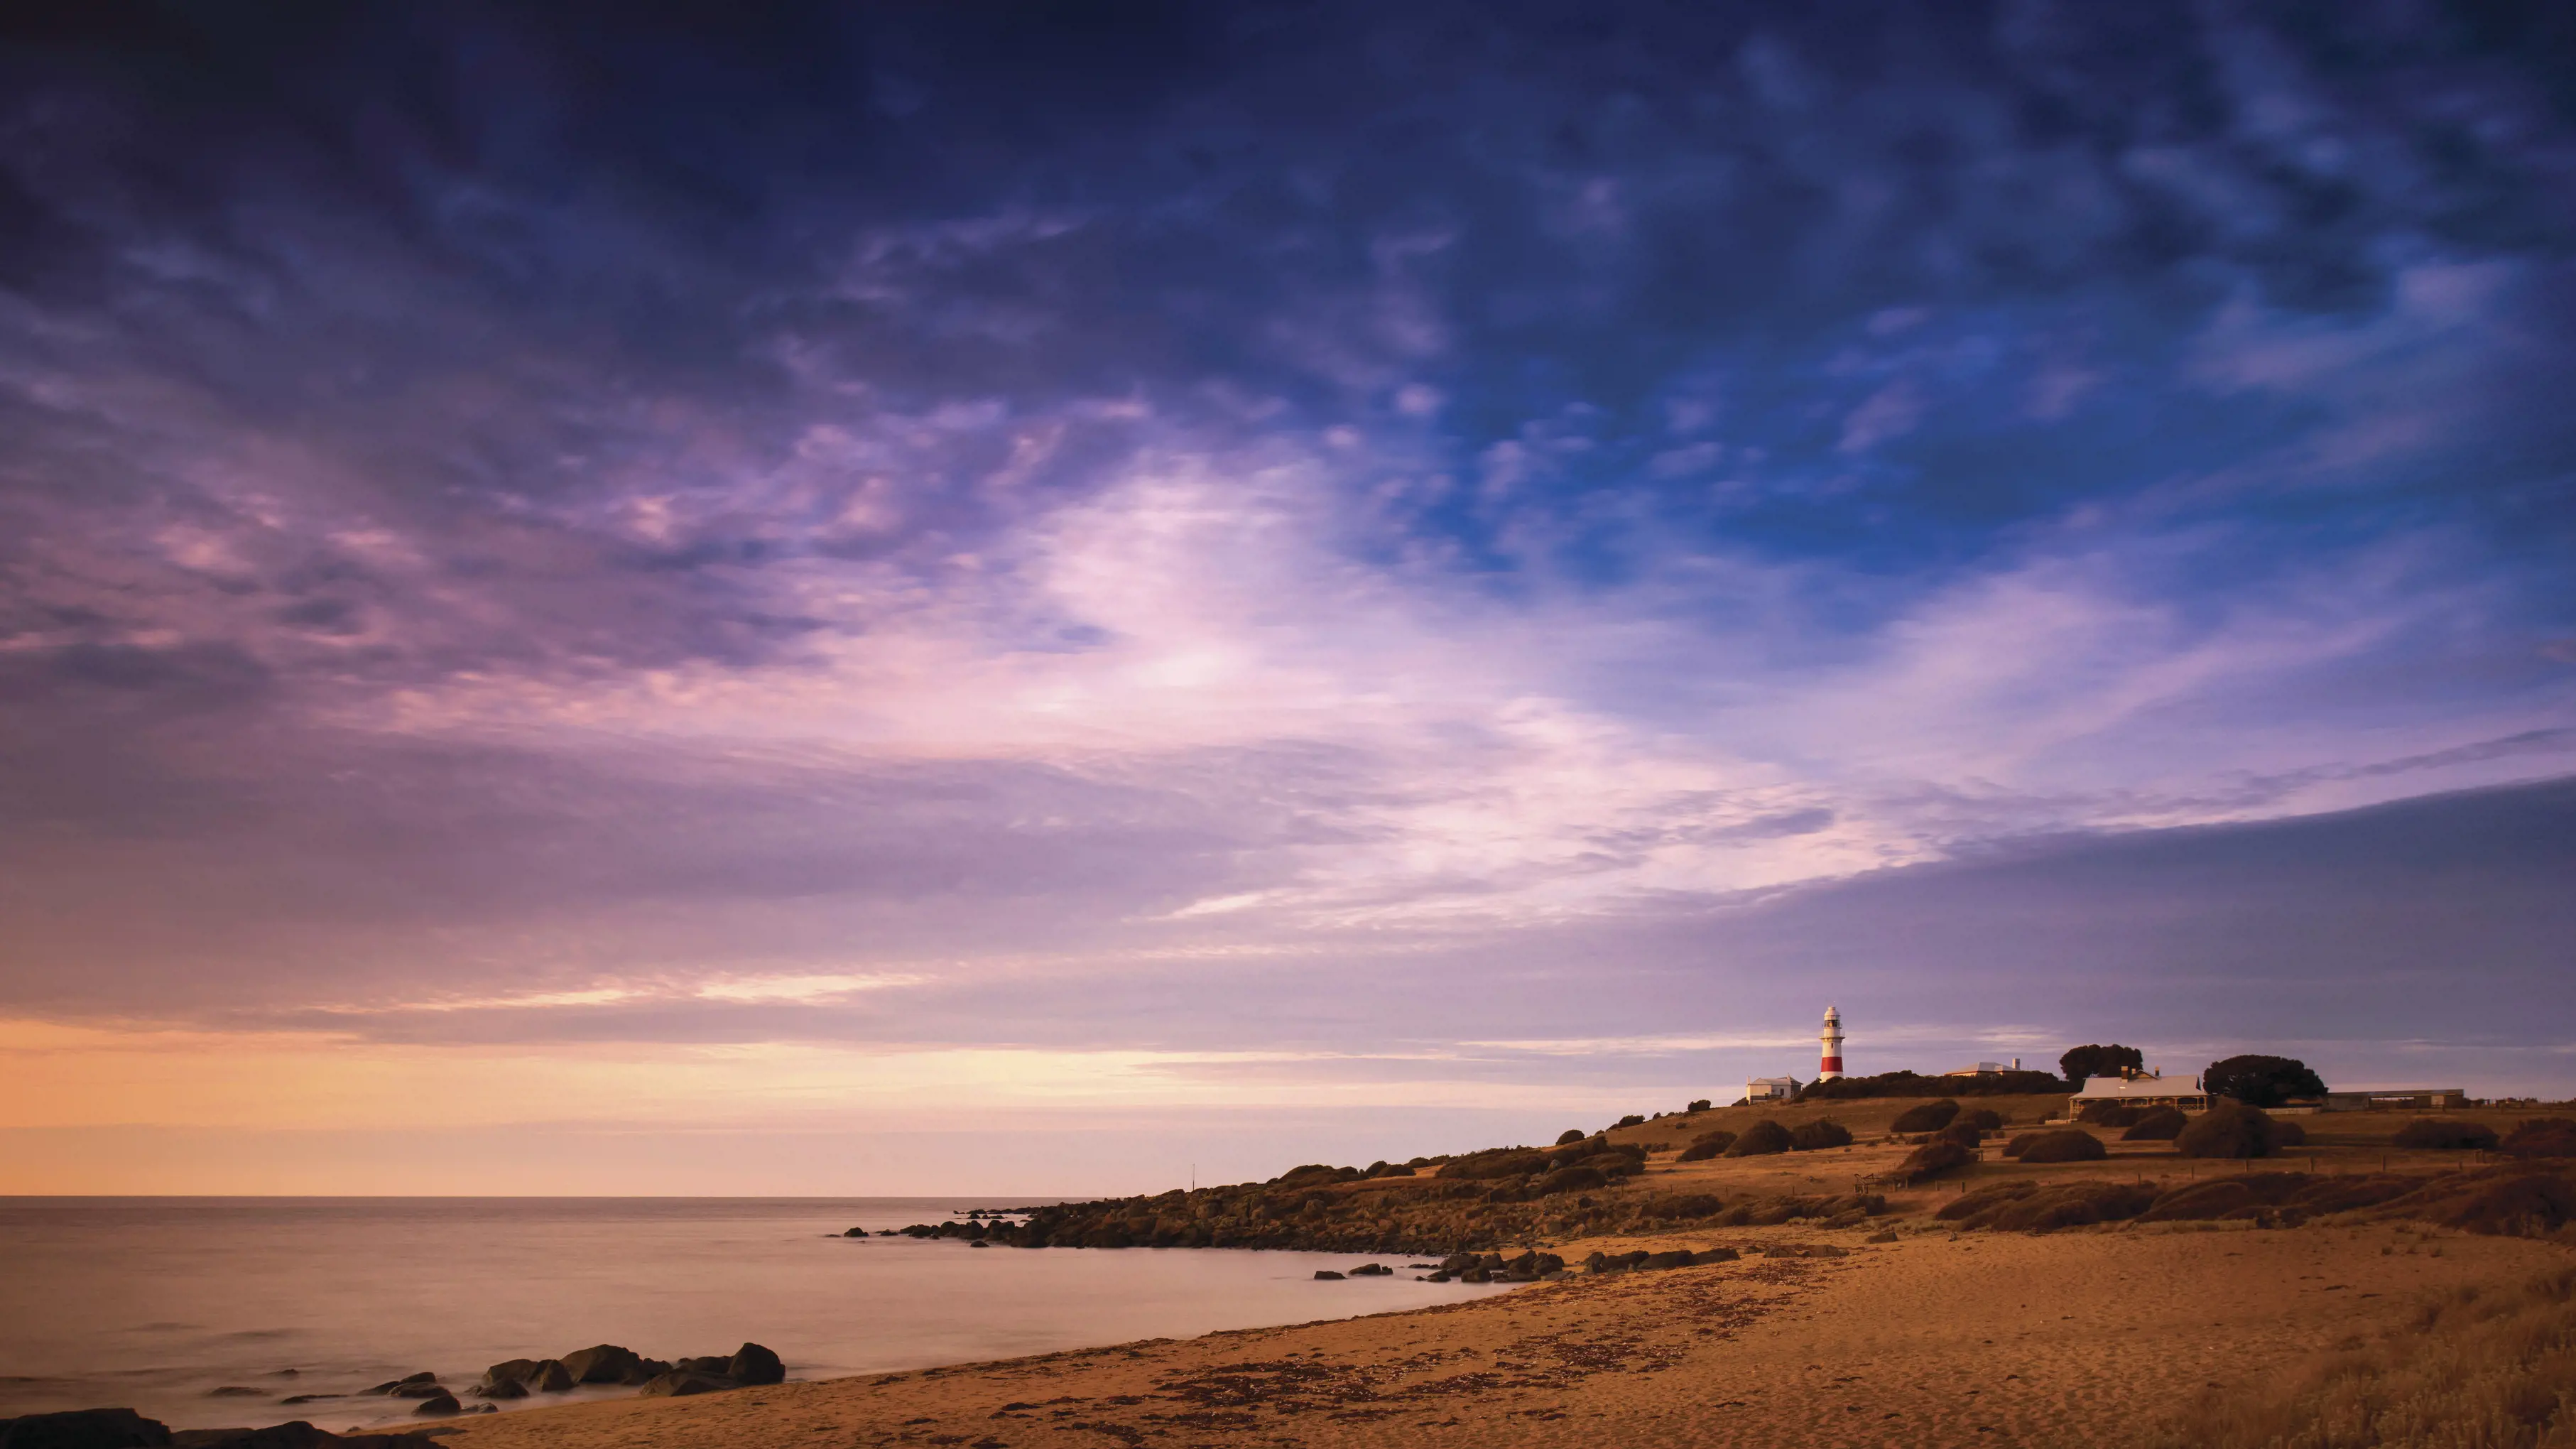 Purple skies over Low Head, on a peninsula at the mouth of kanamaluka / River Tamar, with the lighthouse in the distance.